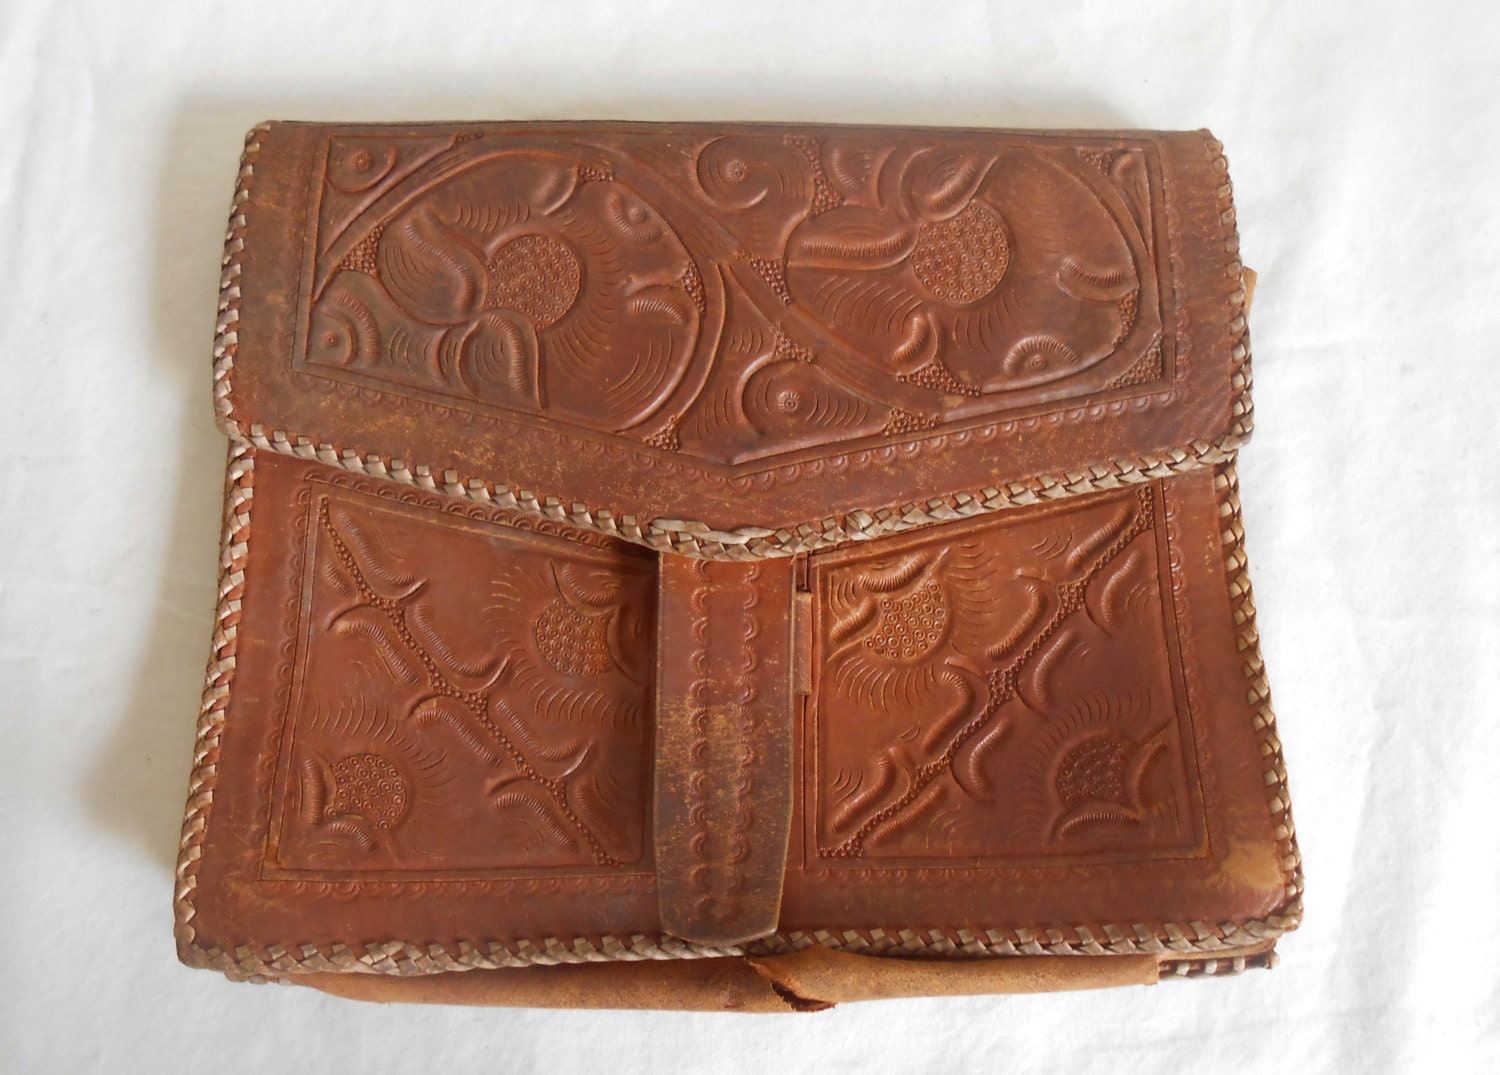 Vintage Hand Tooled Leather Purse Clutch Made in Guatalama - Etsy